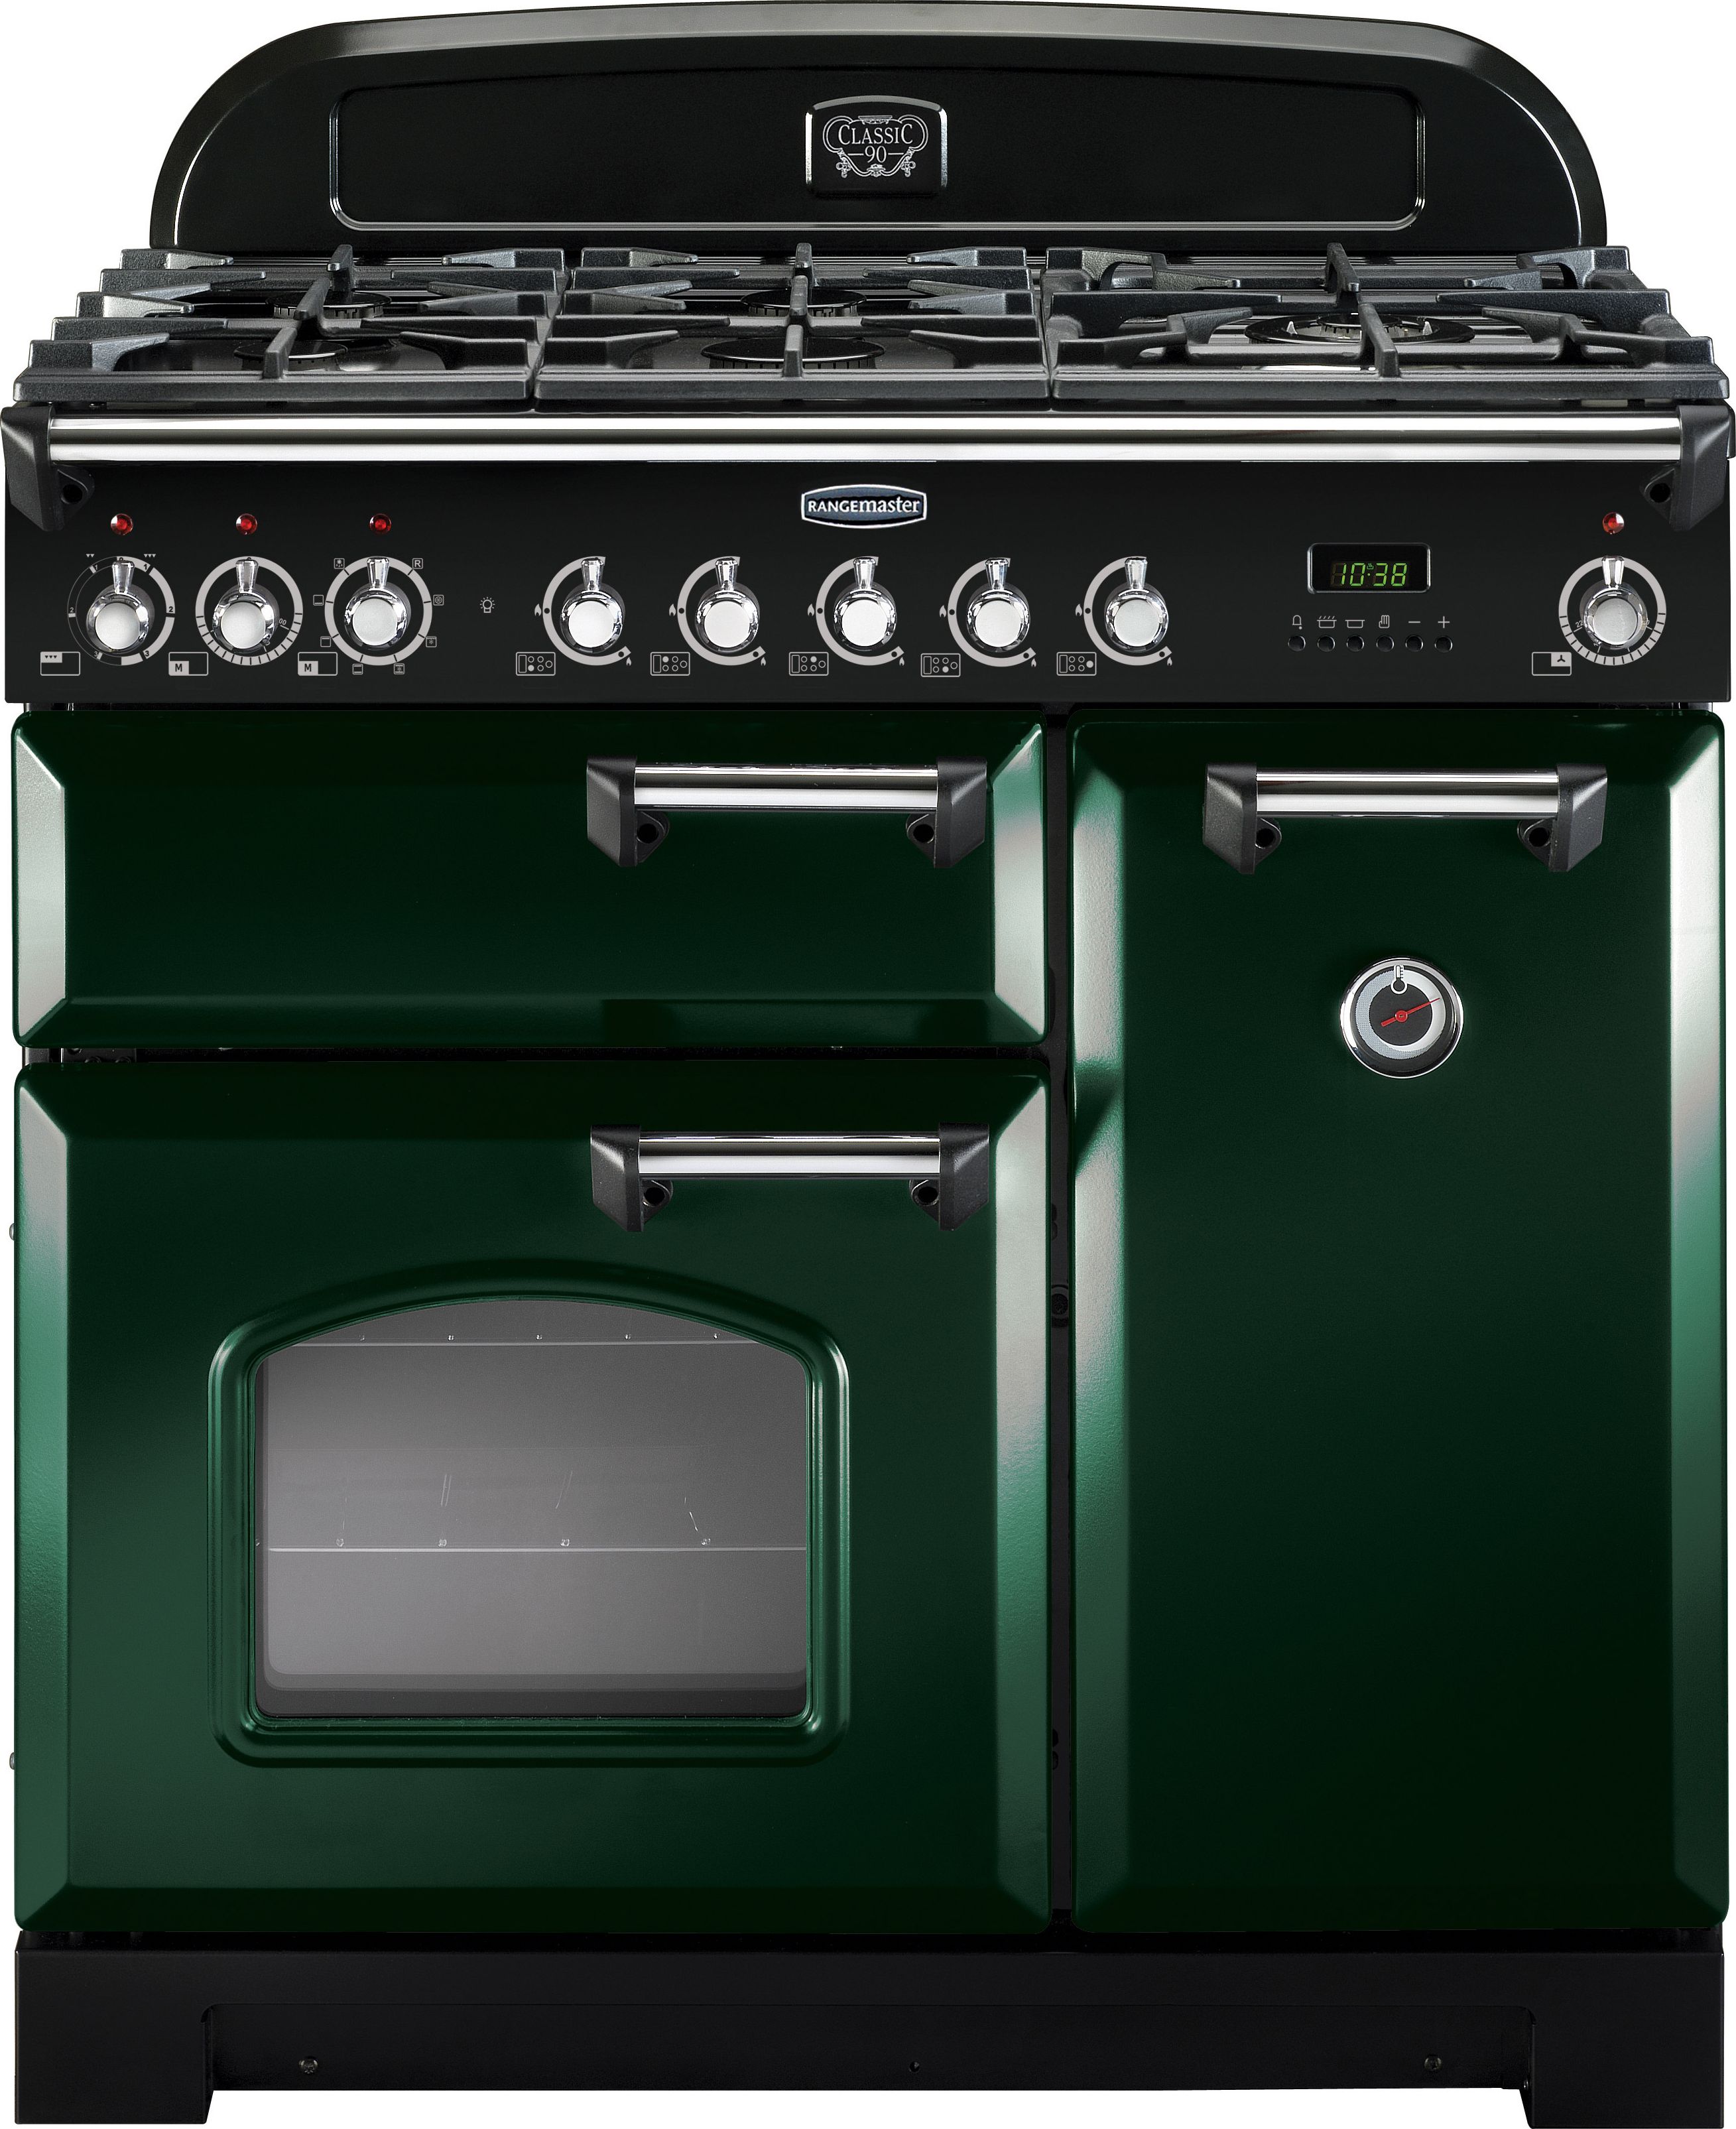 Rangemaster Classic Deluxe CDL90DFFRG/C 90cm Dual Fuel Range Cooker - Racing Green / Chrome - A/A Rated, Green